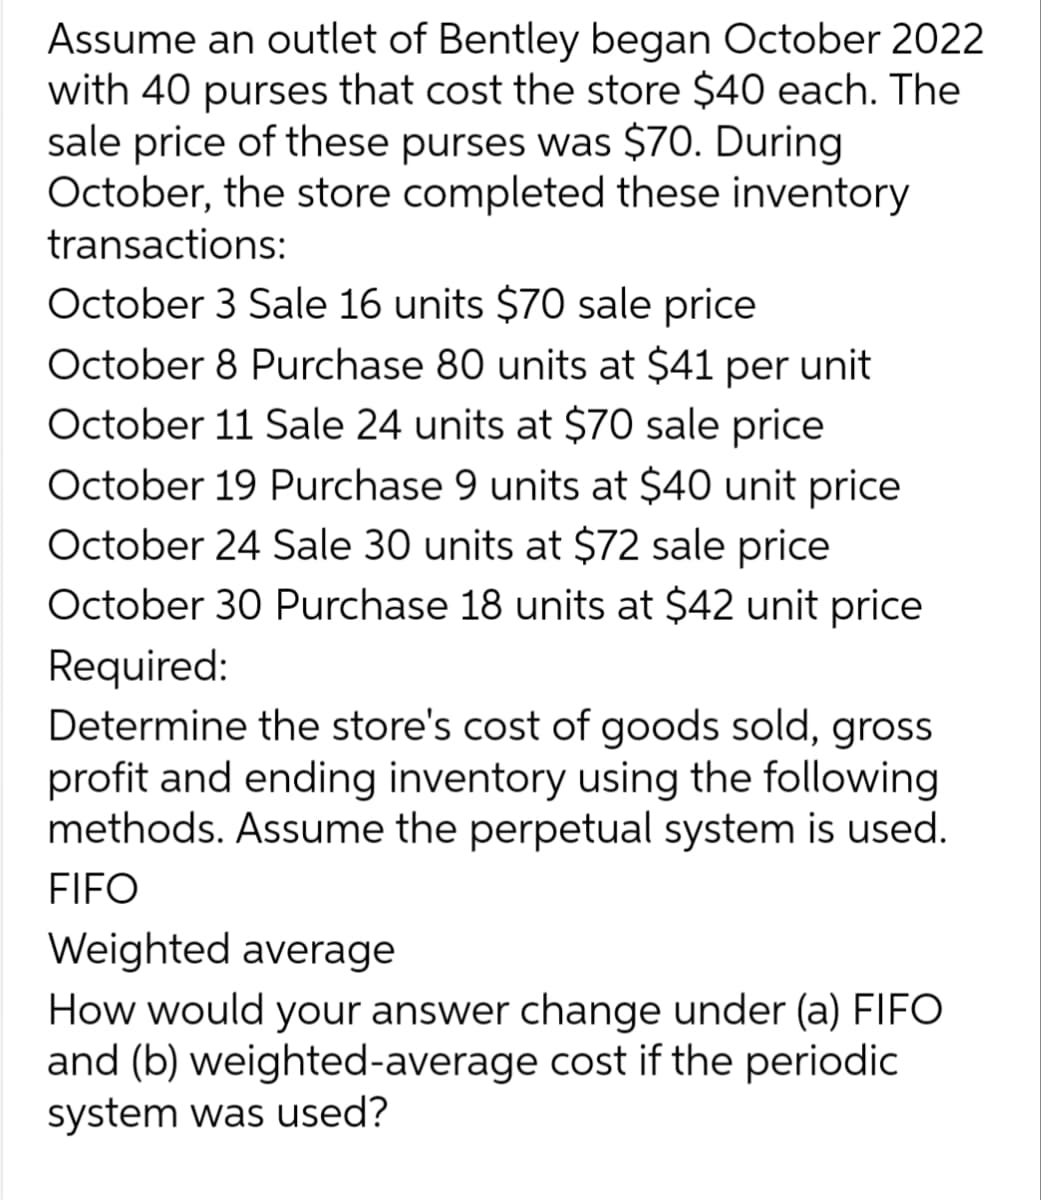 Assume an outlet of Bentley began October 2022
with 40 purses that cost the store $40 each. The
sale price of these purses was $70. During
October, the store completed these inventory
transactions:
October 3 Sale 16 units $70 sale price
October 8 Purchase 80 units at $41 per unit
October 11 Sale 24 units at $70 sale price
October 19 Purchase 9 units at $40 unit price
October 24 Sale 30 units at $72 sale price
October 30 Purchase 18 units at $42 unit price
Required:
Determine the store's cost of goods sold, gross
profit and ending inventory using the following
methods. Assume the perpetual system is used.
FIFO
Weighted average
How would your answer change under (a) FIFO
and (b) weighted-average cost if the periodic
system was used?